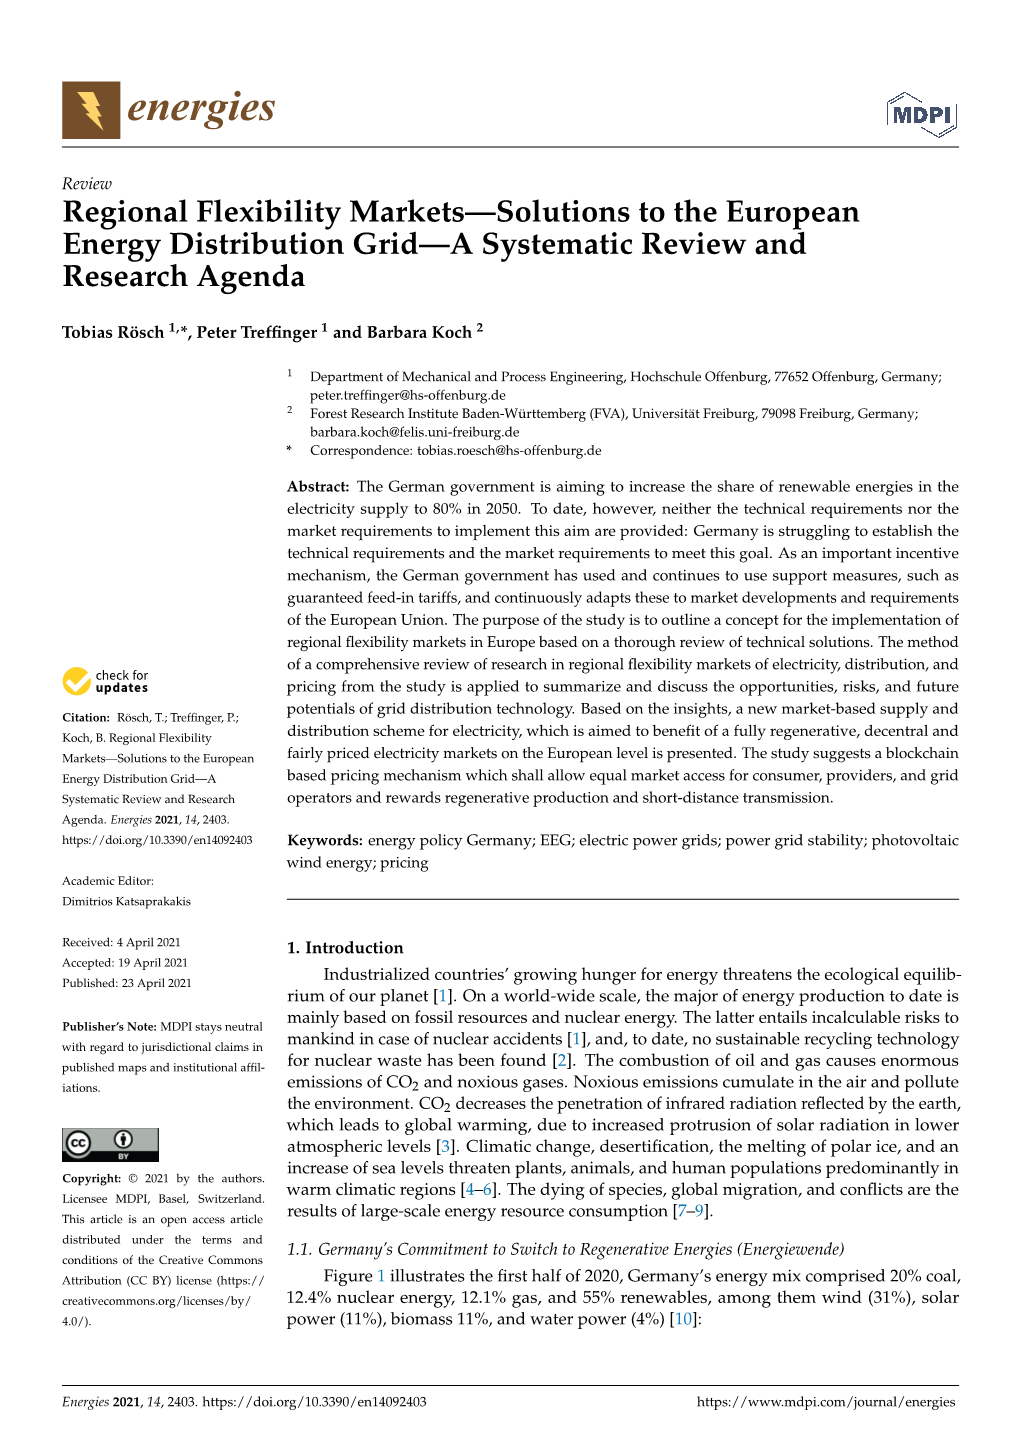 Regional Flexibility Markets—Solutions to the European Energy Distribution Grid—A Systematic Review and Research Agenda